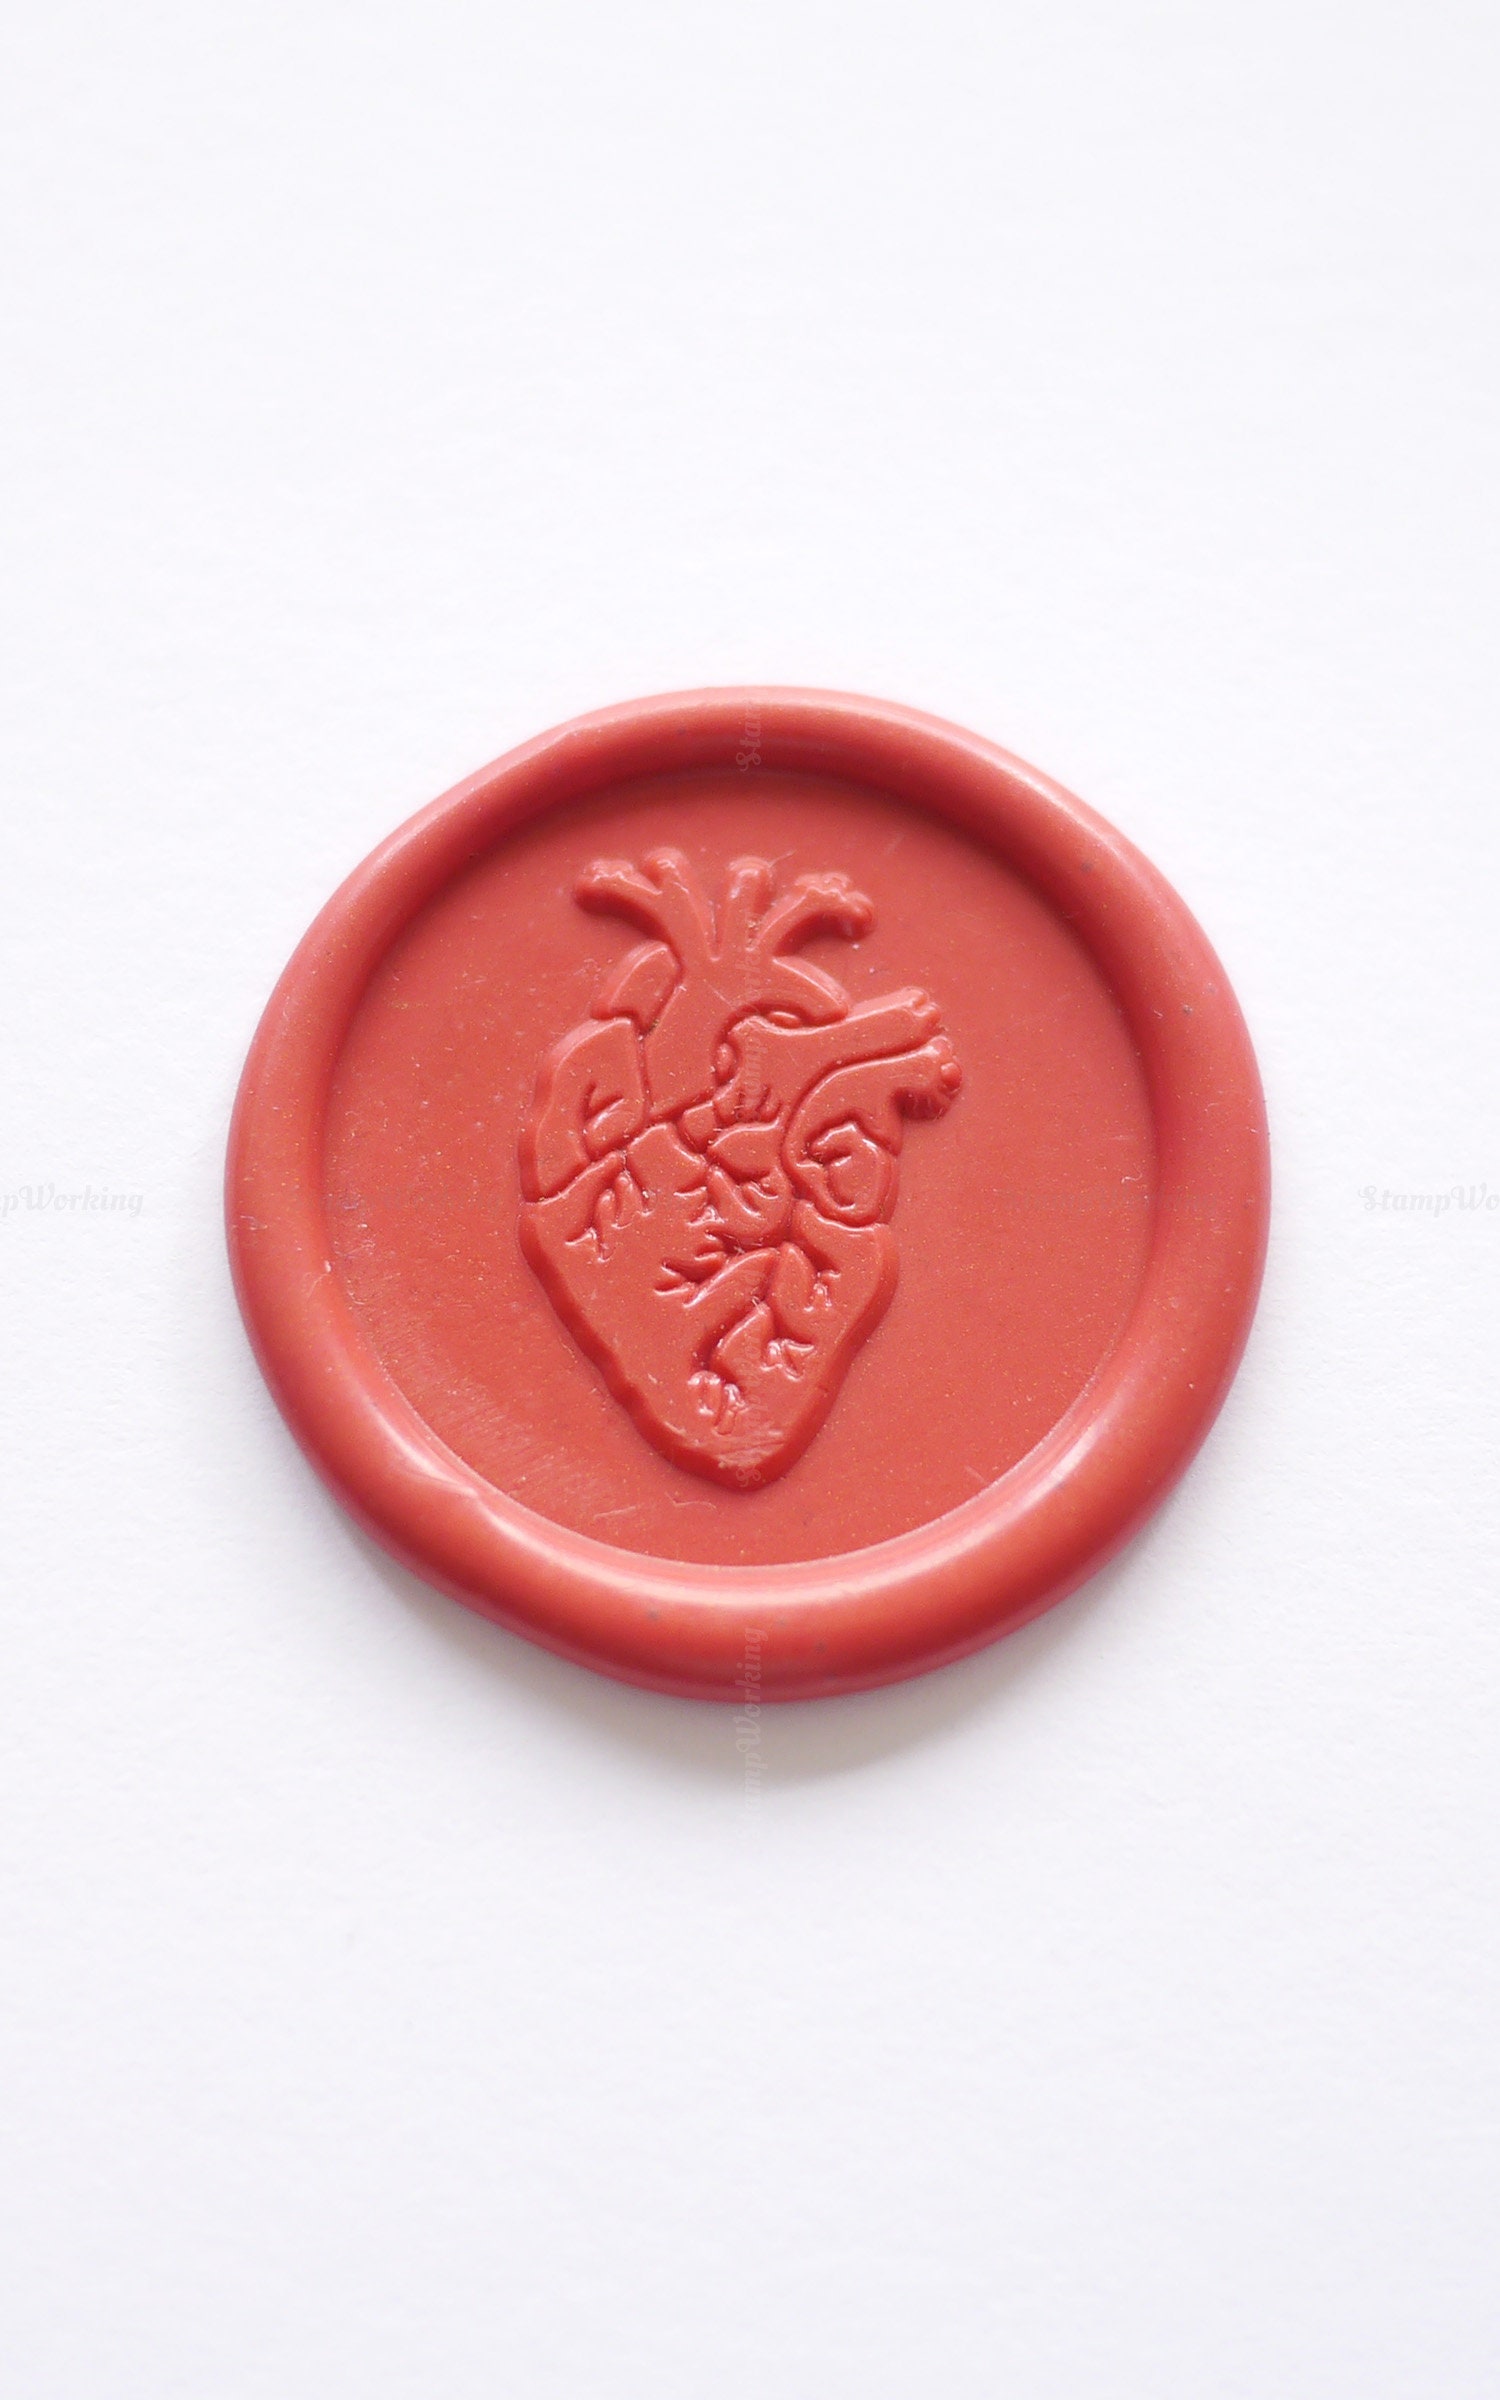 Anatomical Heart Sealing Wax Stamp Heart Wax Seal Stamp Medical Student  Gift Health Care Sealing Stamp Cardiac Wax Seals Stamp 